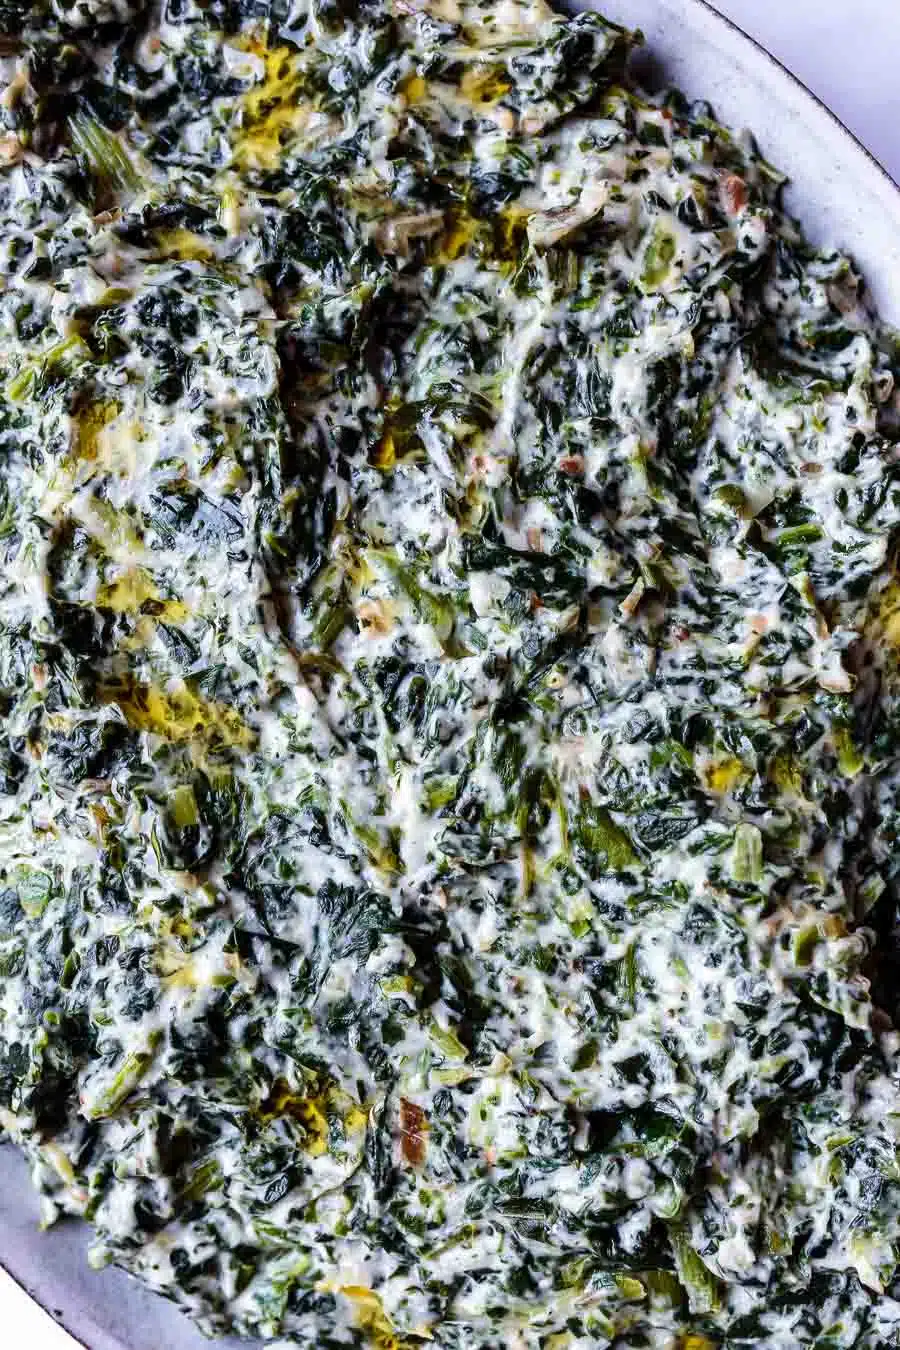 Close up of vegan creamed spinach. Only part of the edge of the plate is visible on the right. The dish is very green with a white sauce throughout it.